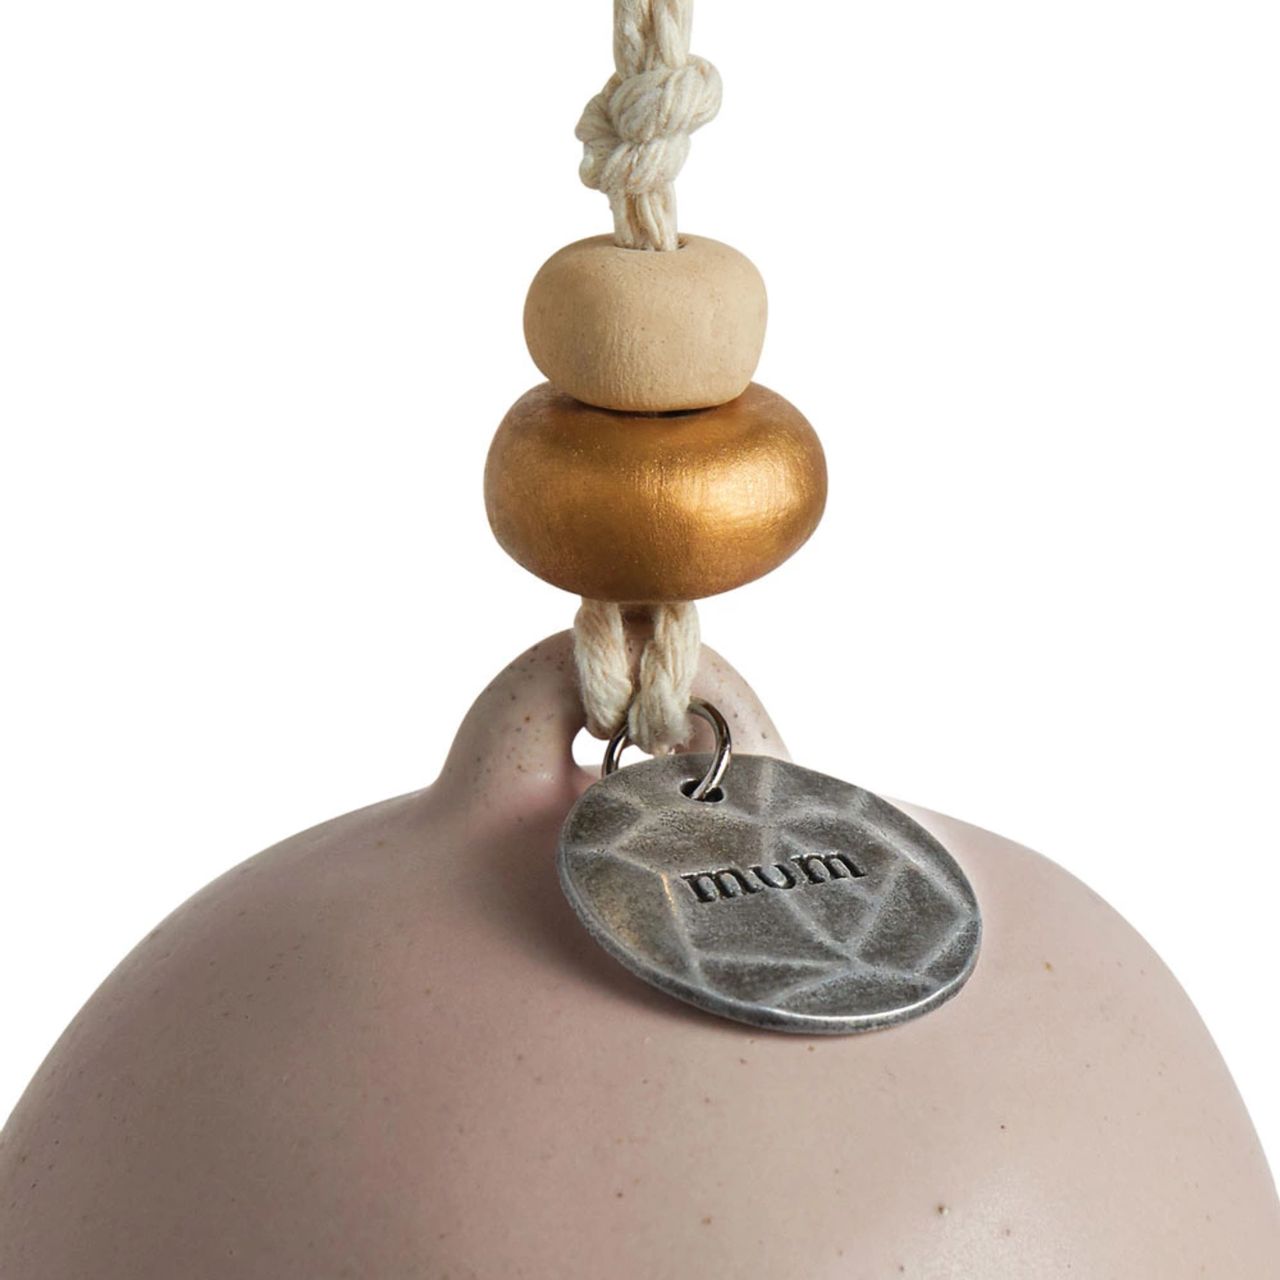 Inspired Bell - Mum by Demdaco  Gift mum the Mini Inspired Bell - Mum from the Inspired Everyday collection to help celebrate her! A melodic way to remind mom she's loved, appreciated and thought of. This stoneware bell showcases thoughtful craftsmanship and is a heartfelt gift for Mother's Day or her birthday.